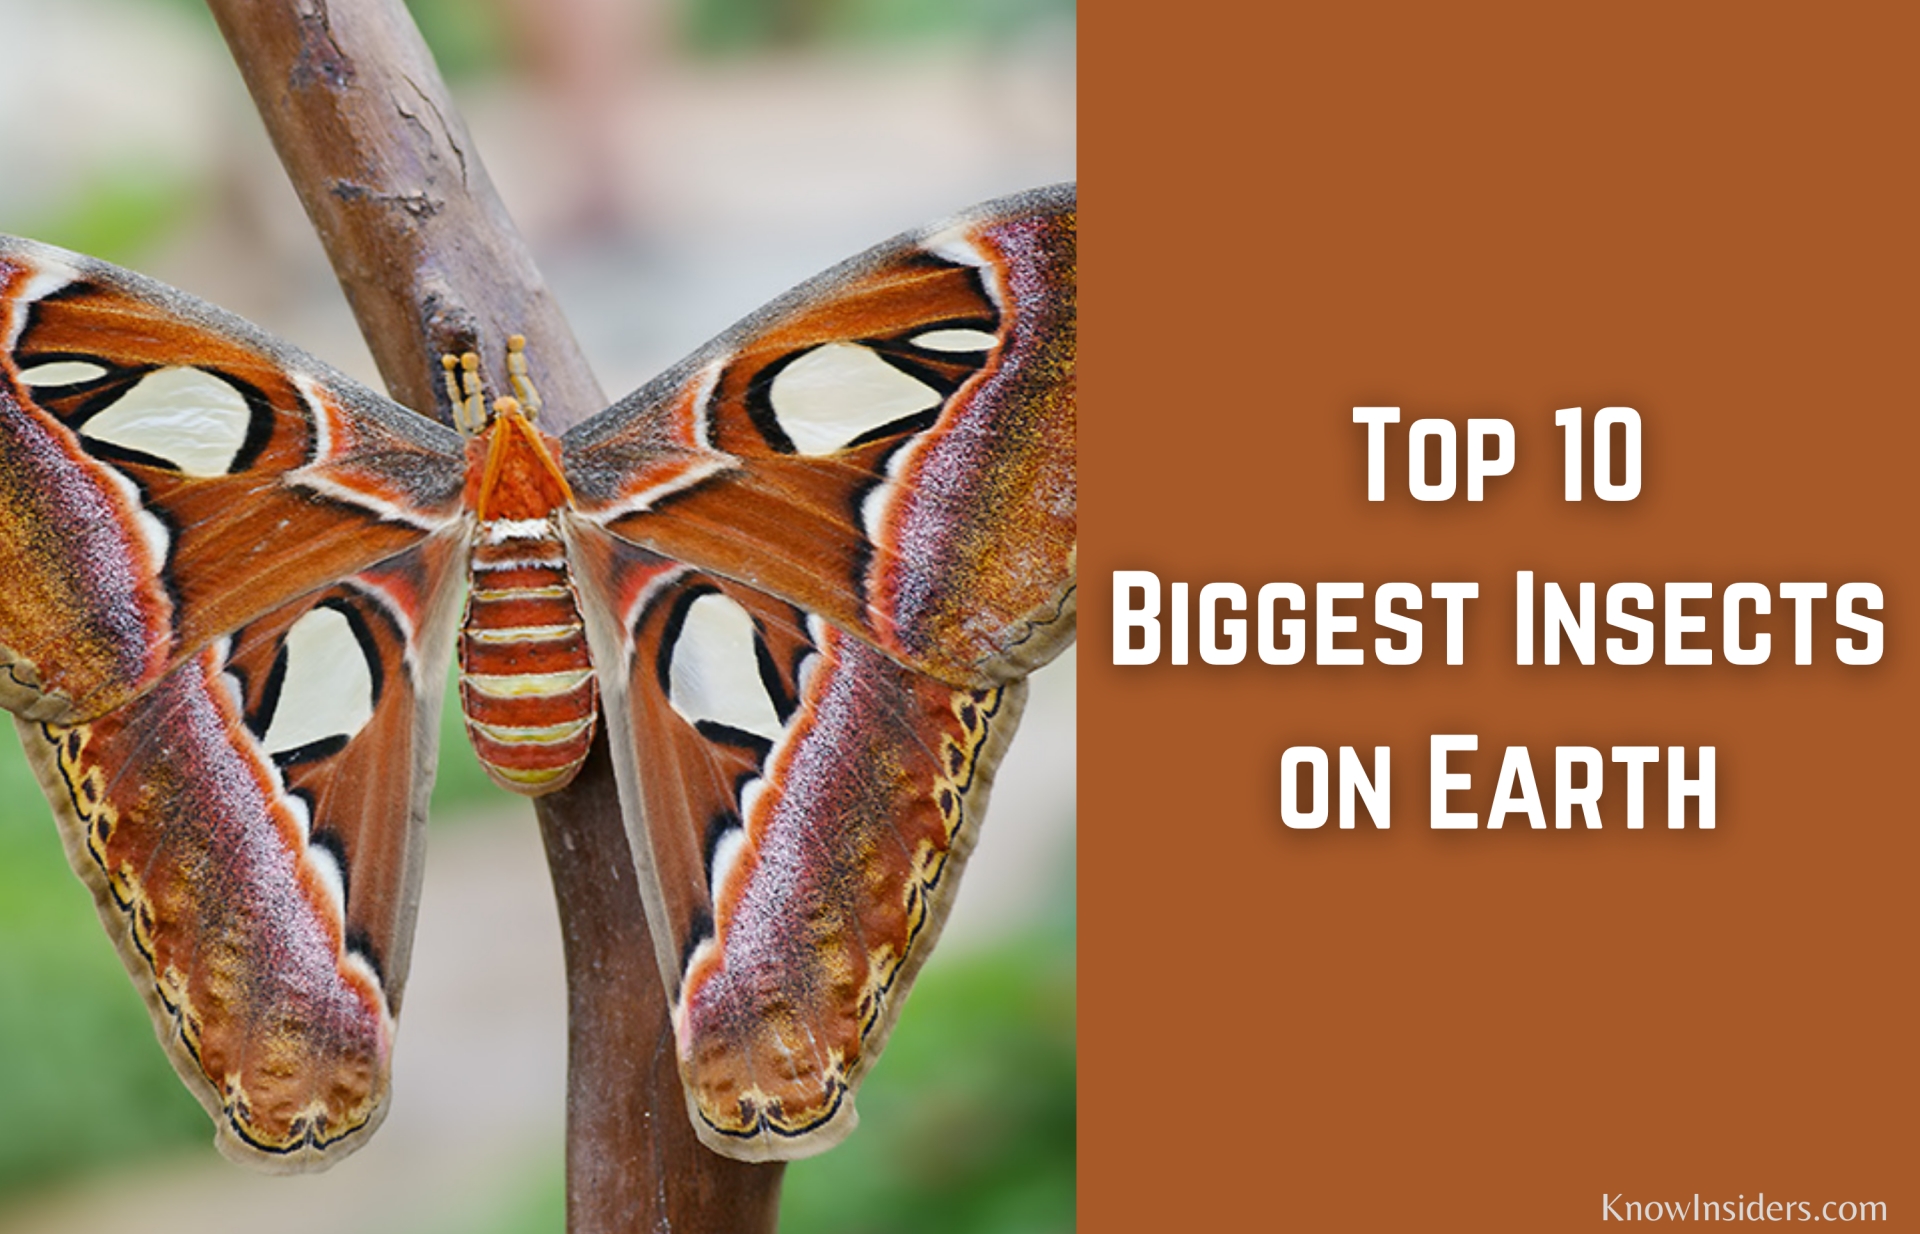 Top 10 Biggest Insects in the World